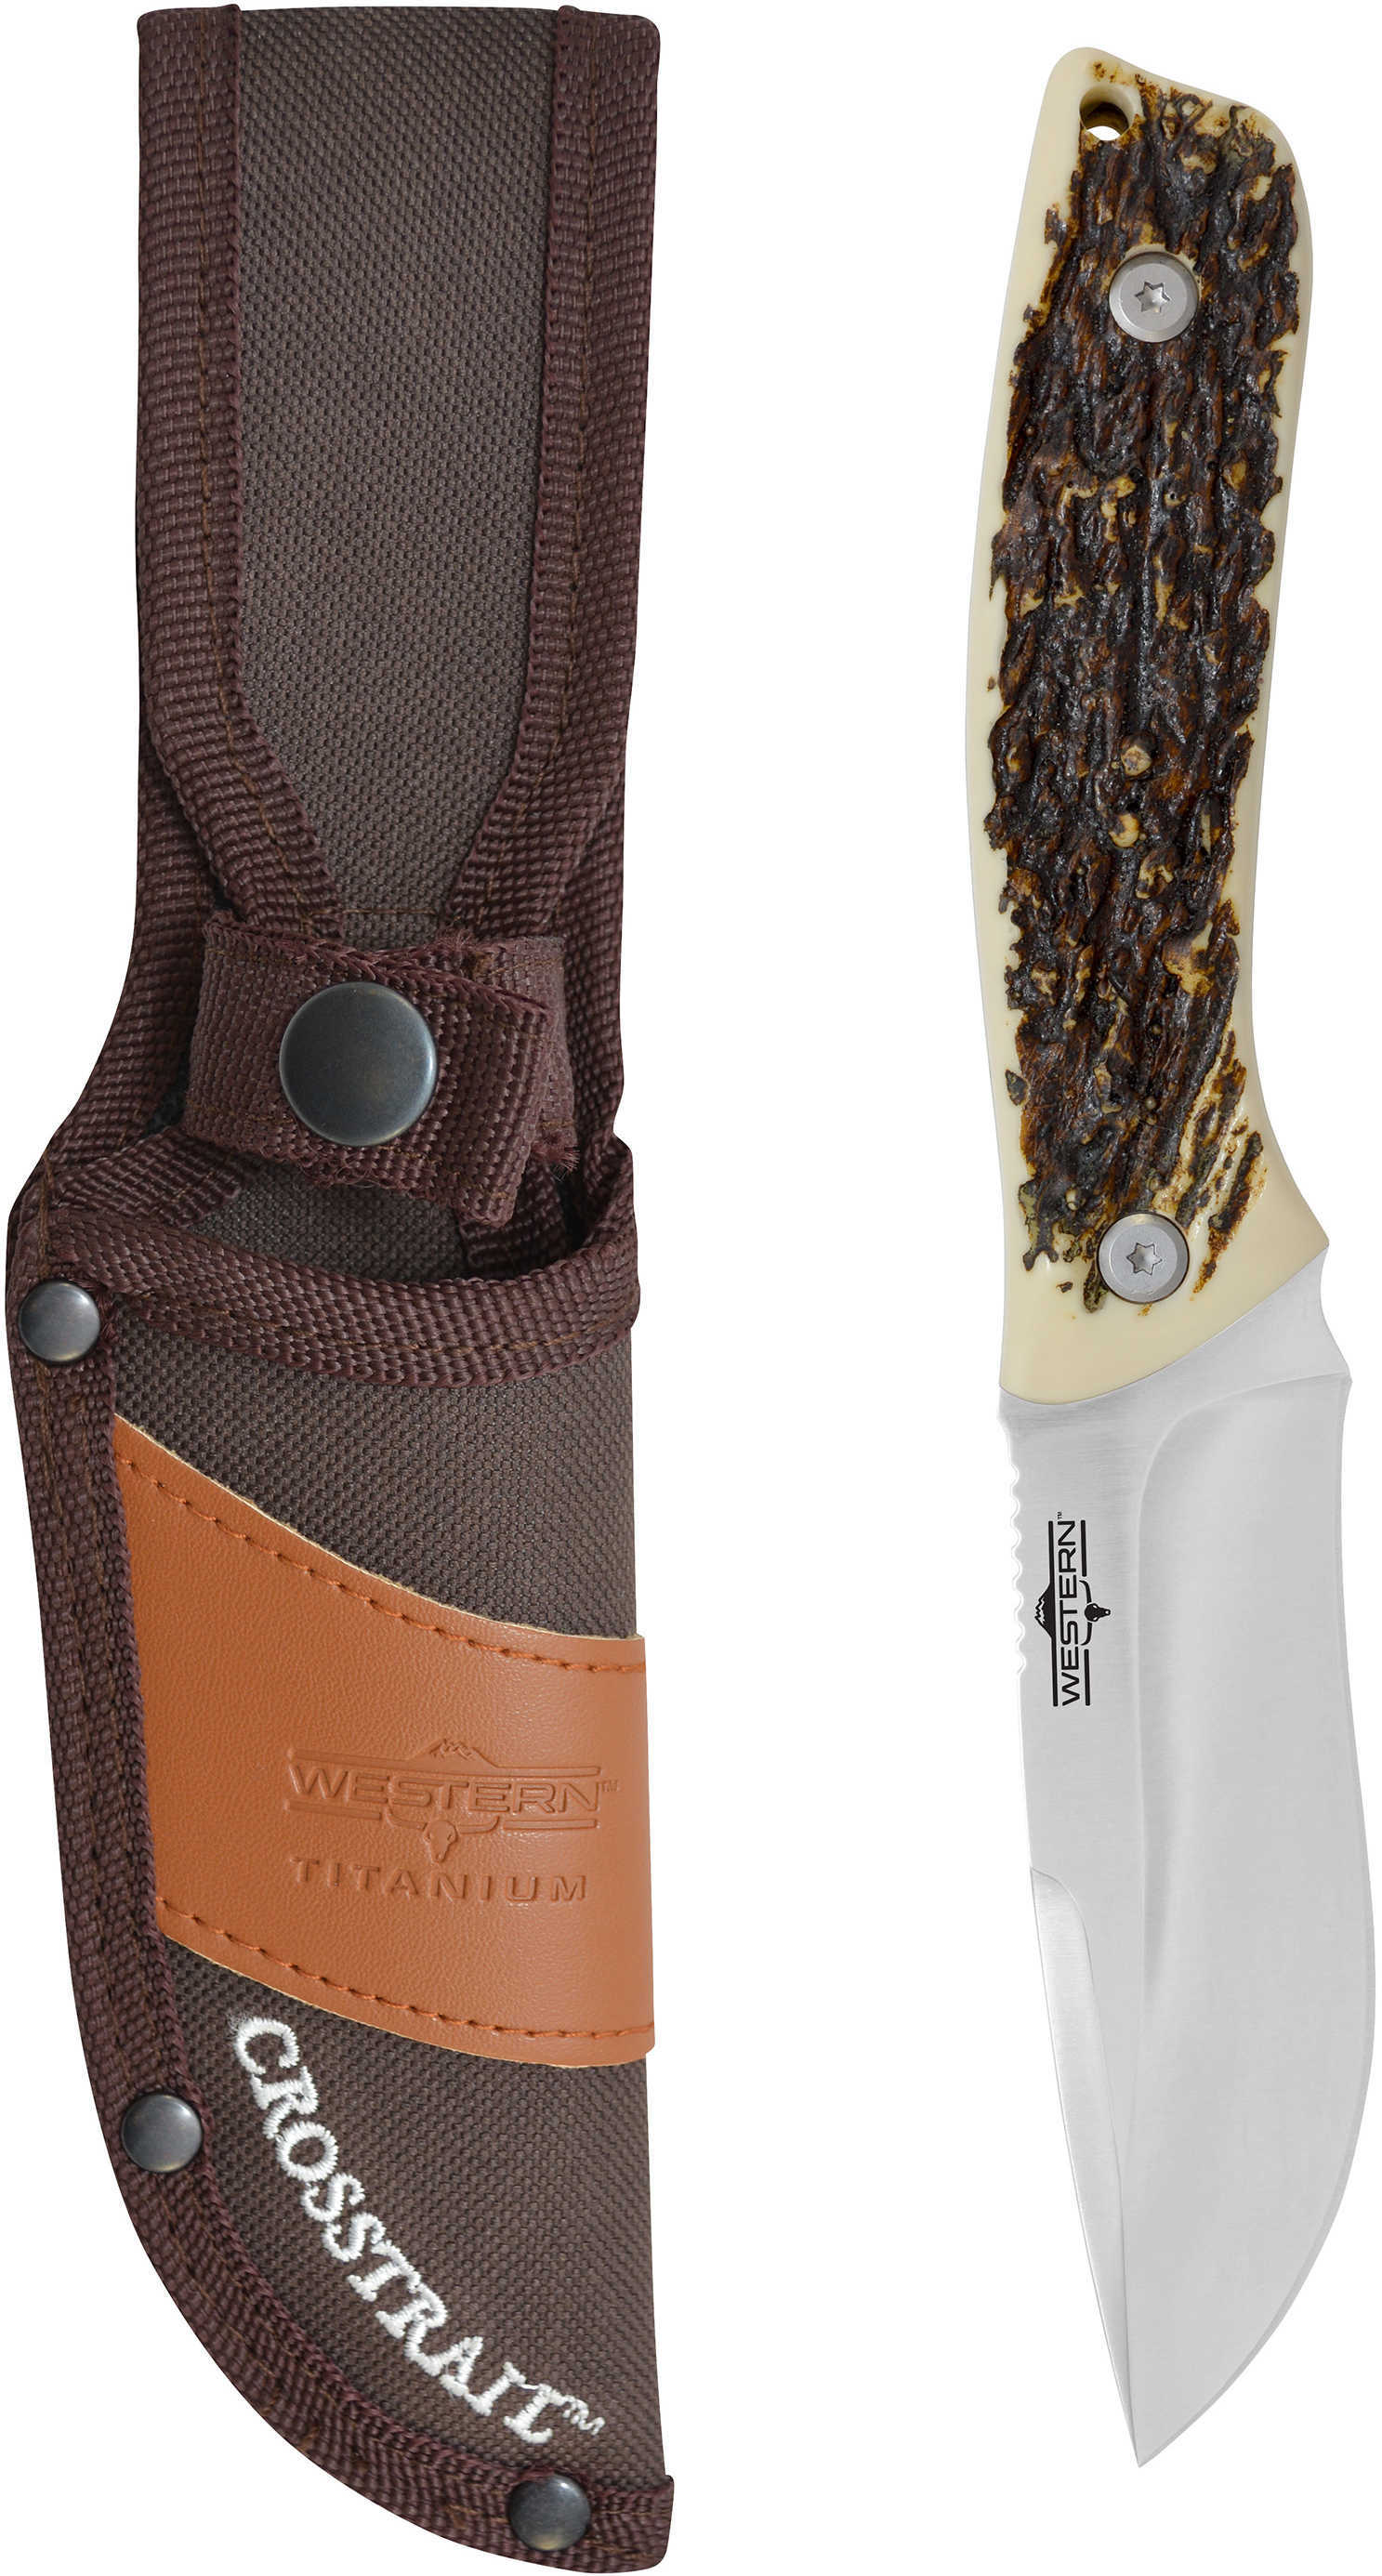 Camillus Western Cross Trail 9in Ti Bonded Fixed Blade Knife